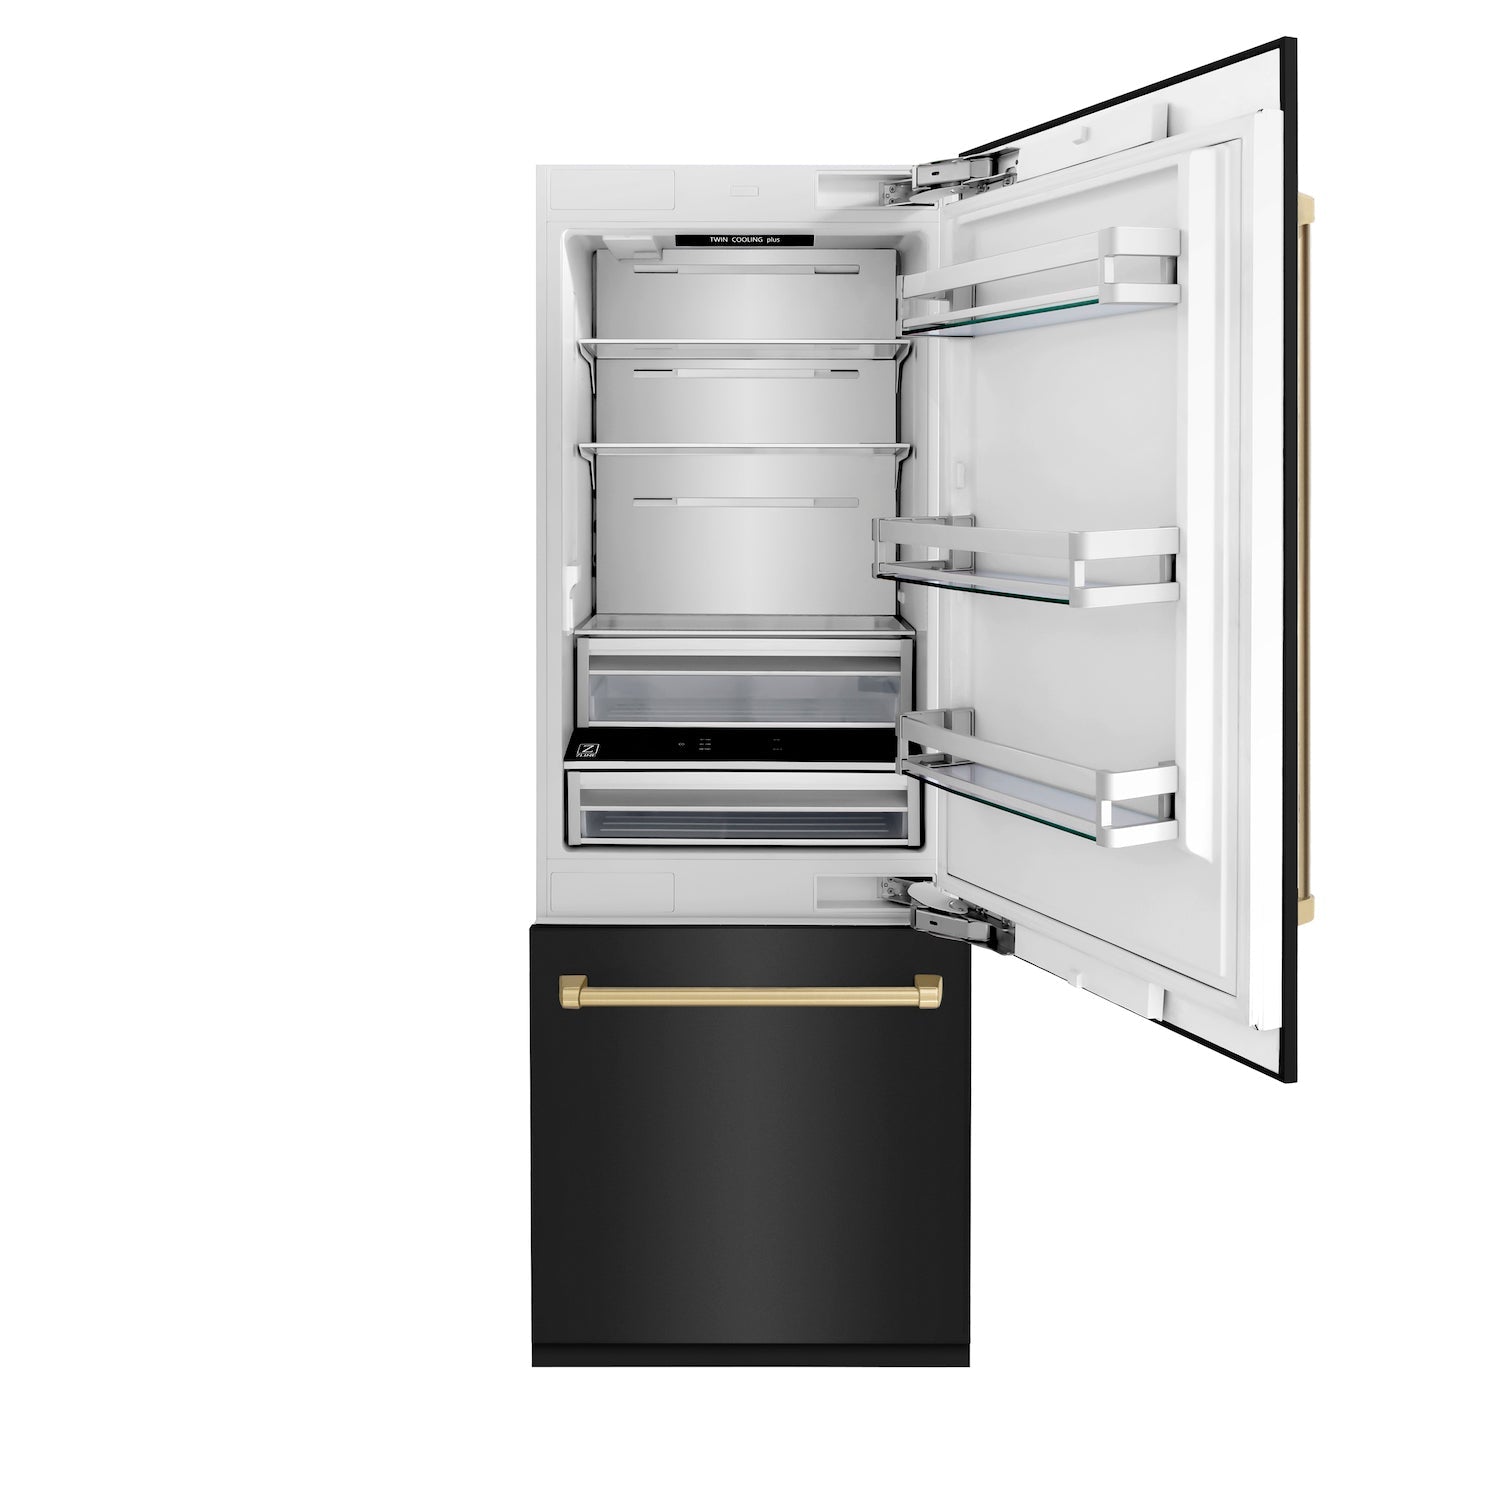 ZLINE 30" Autograph Edition Built-in 2-Door Bottom Freezer Refrigerator - Black Stainless Steel with Champagne Bronze Accents, Internal Water and Ice Dispenser